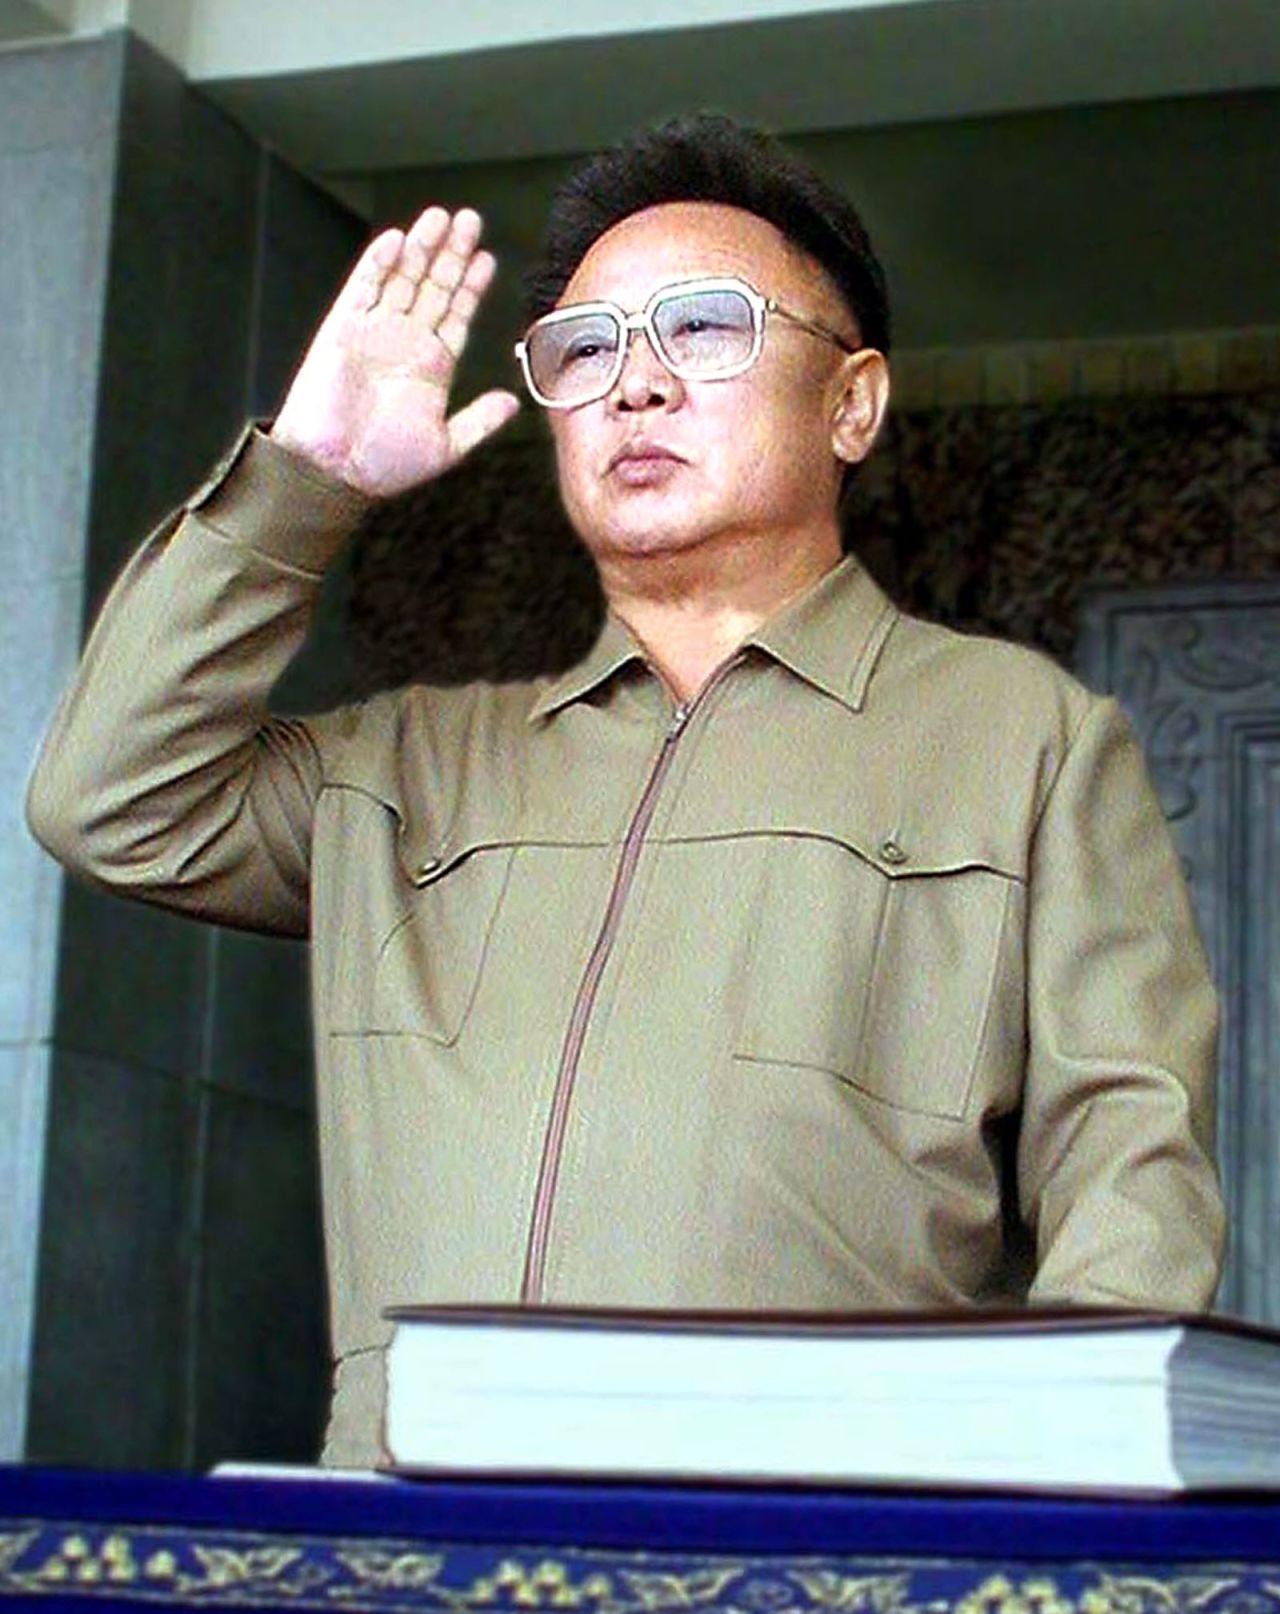 Kim Jong Il saluted his troops during a military parade in Pyongyang in 2002 to mark the 70th anniversary of the founding of the country's army. He died after a heart attack in December 2011. State television reported that Kim died due to "overwork" after "dedicating his life to the people."